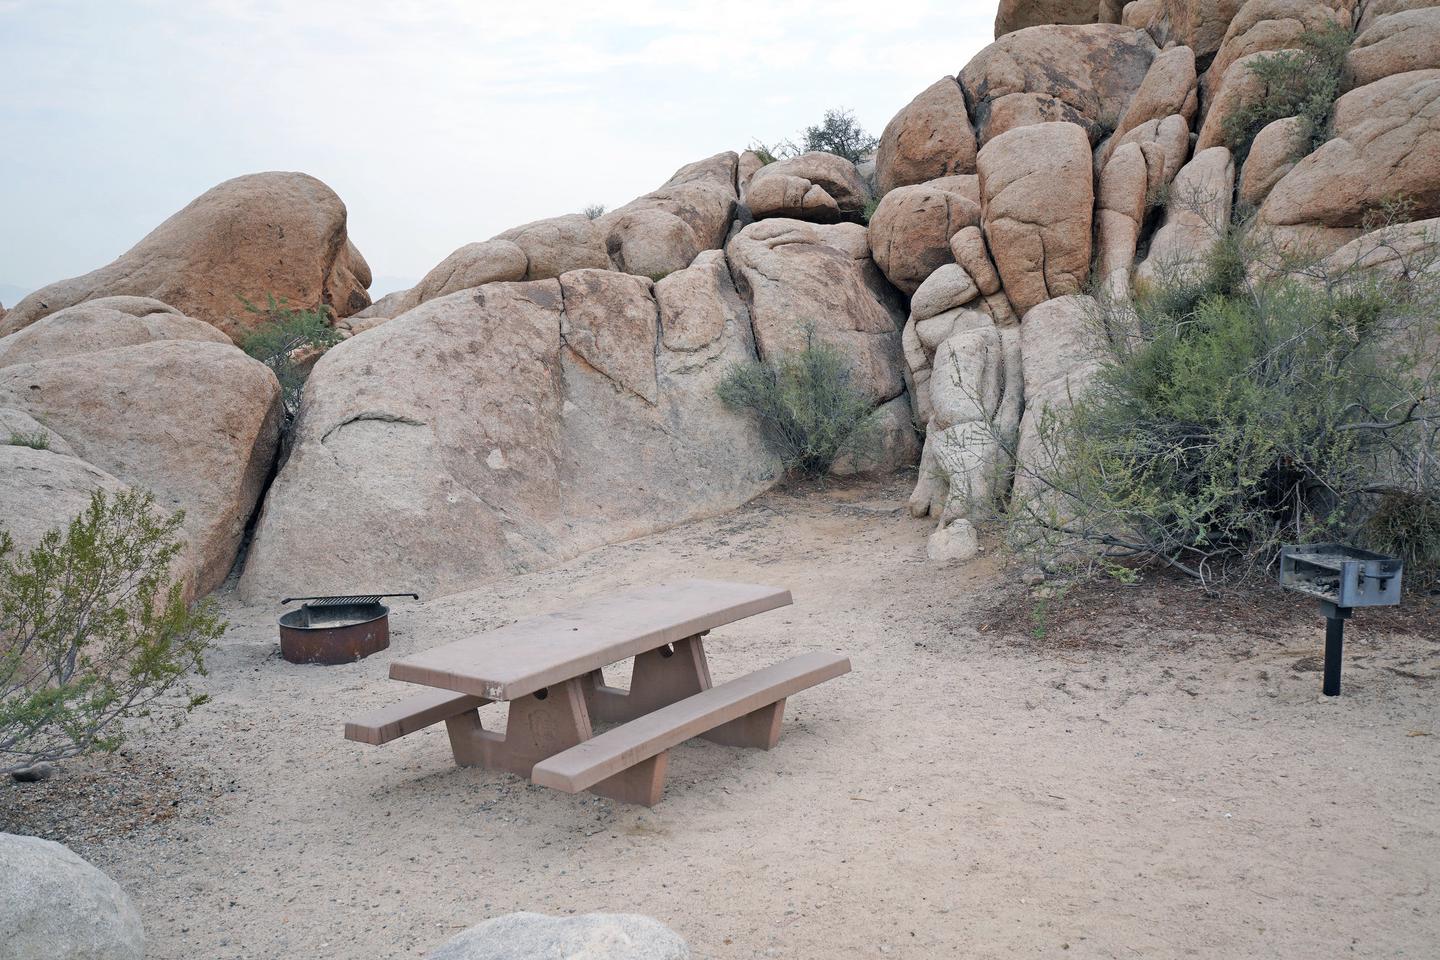  Campsite  with picnic table surrounded by boulders.Campsite.